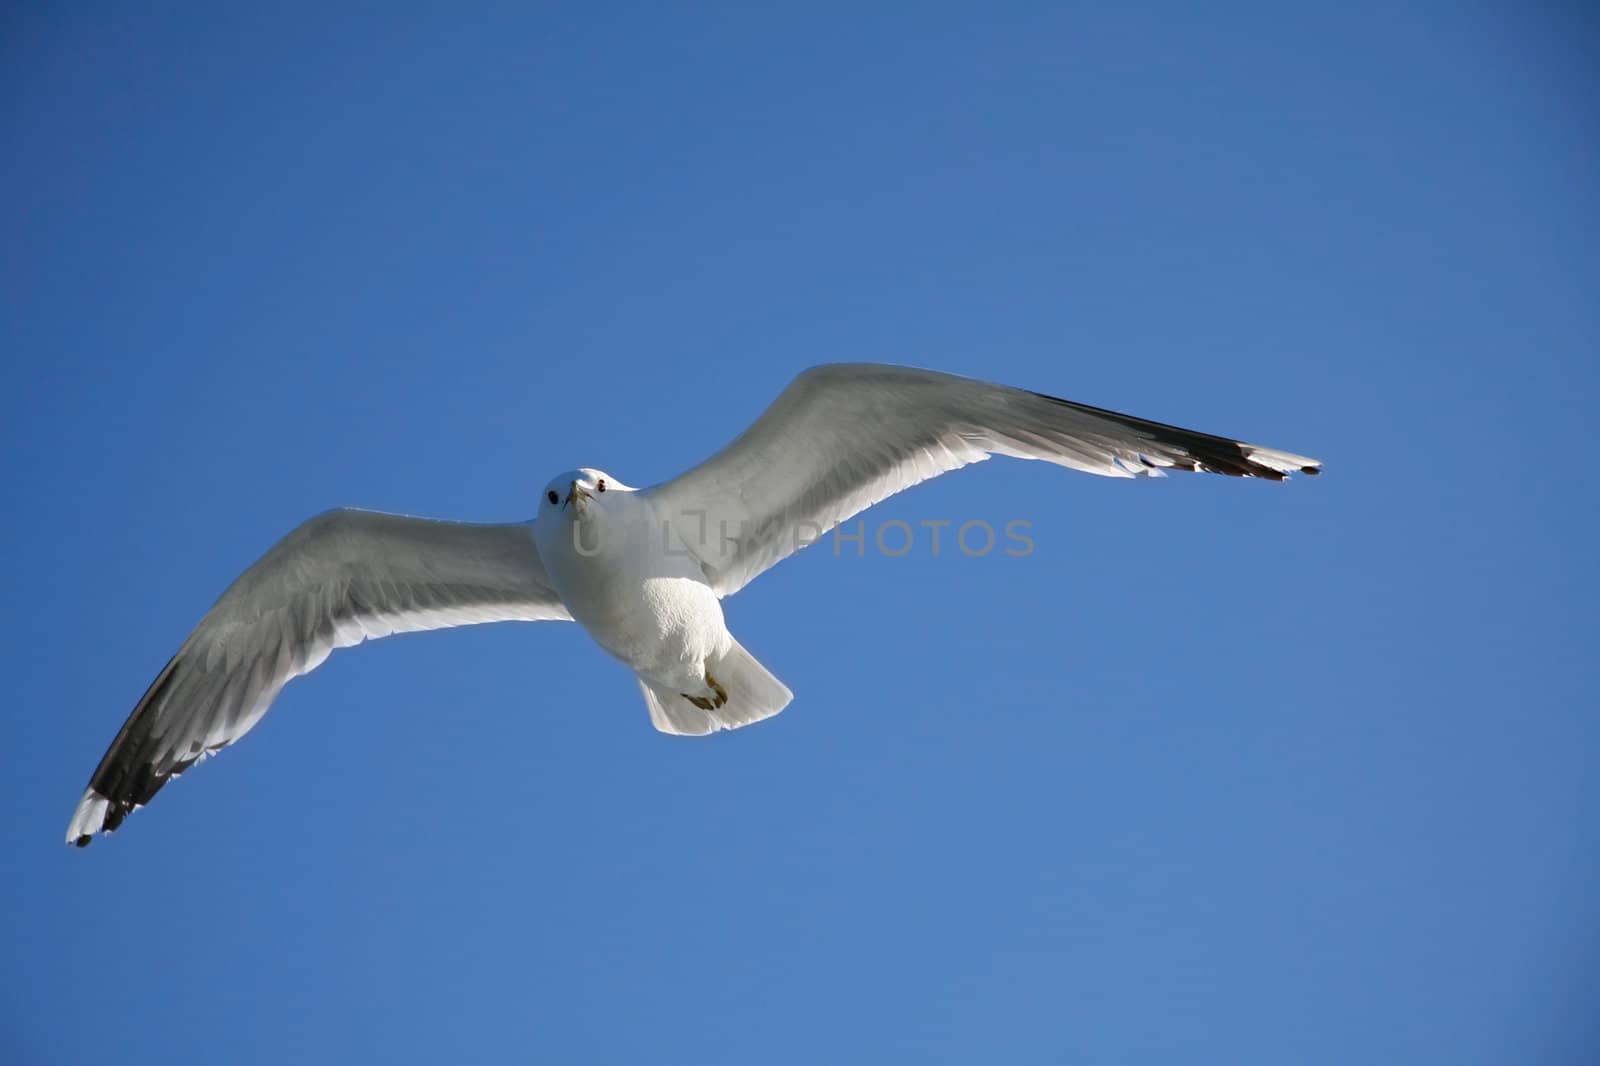 seagull in flight against the blue sky 